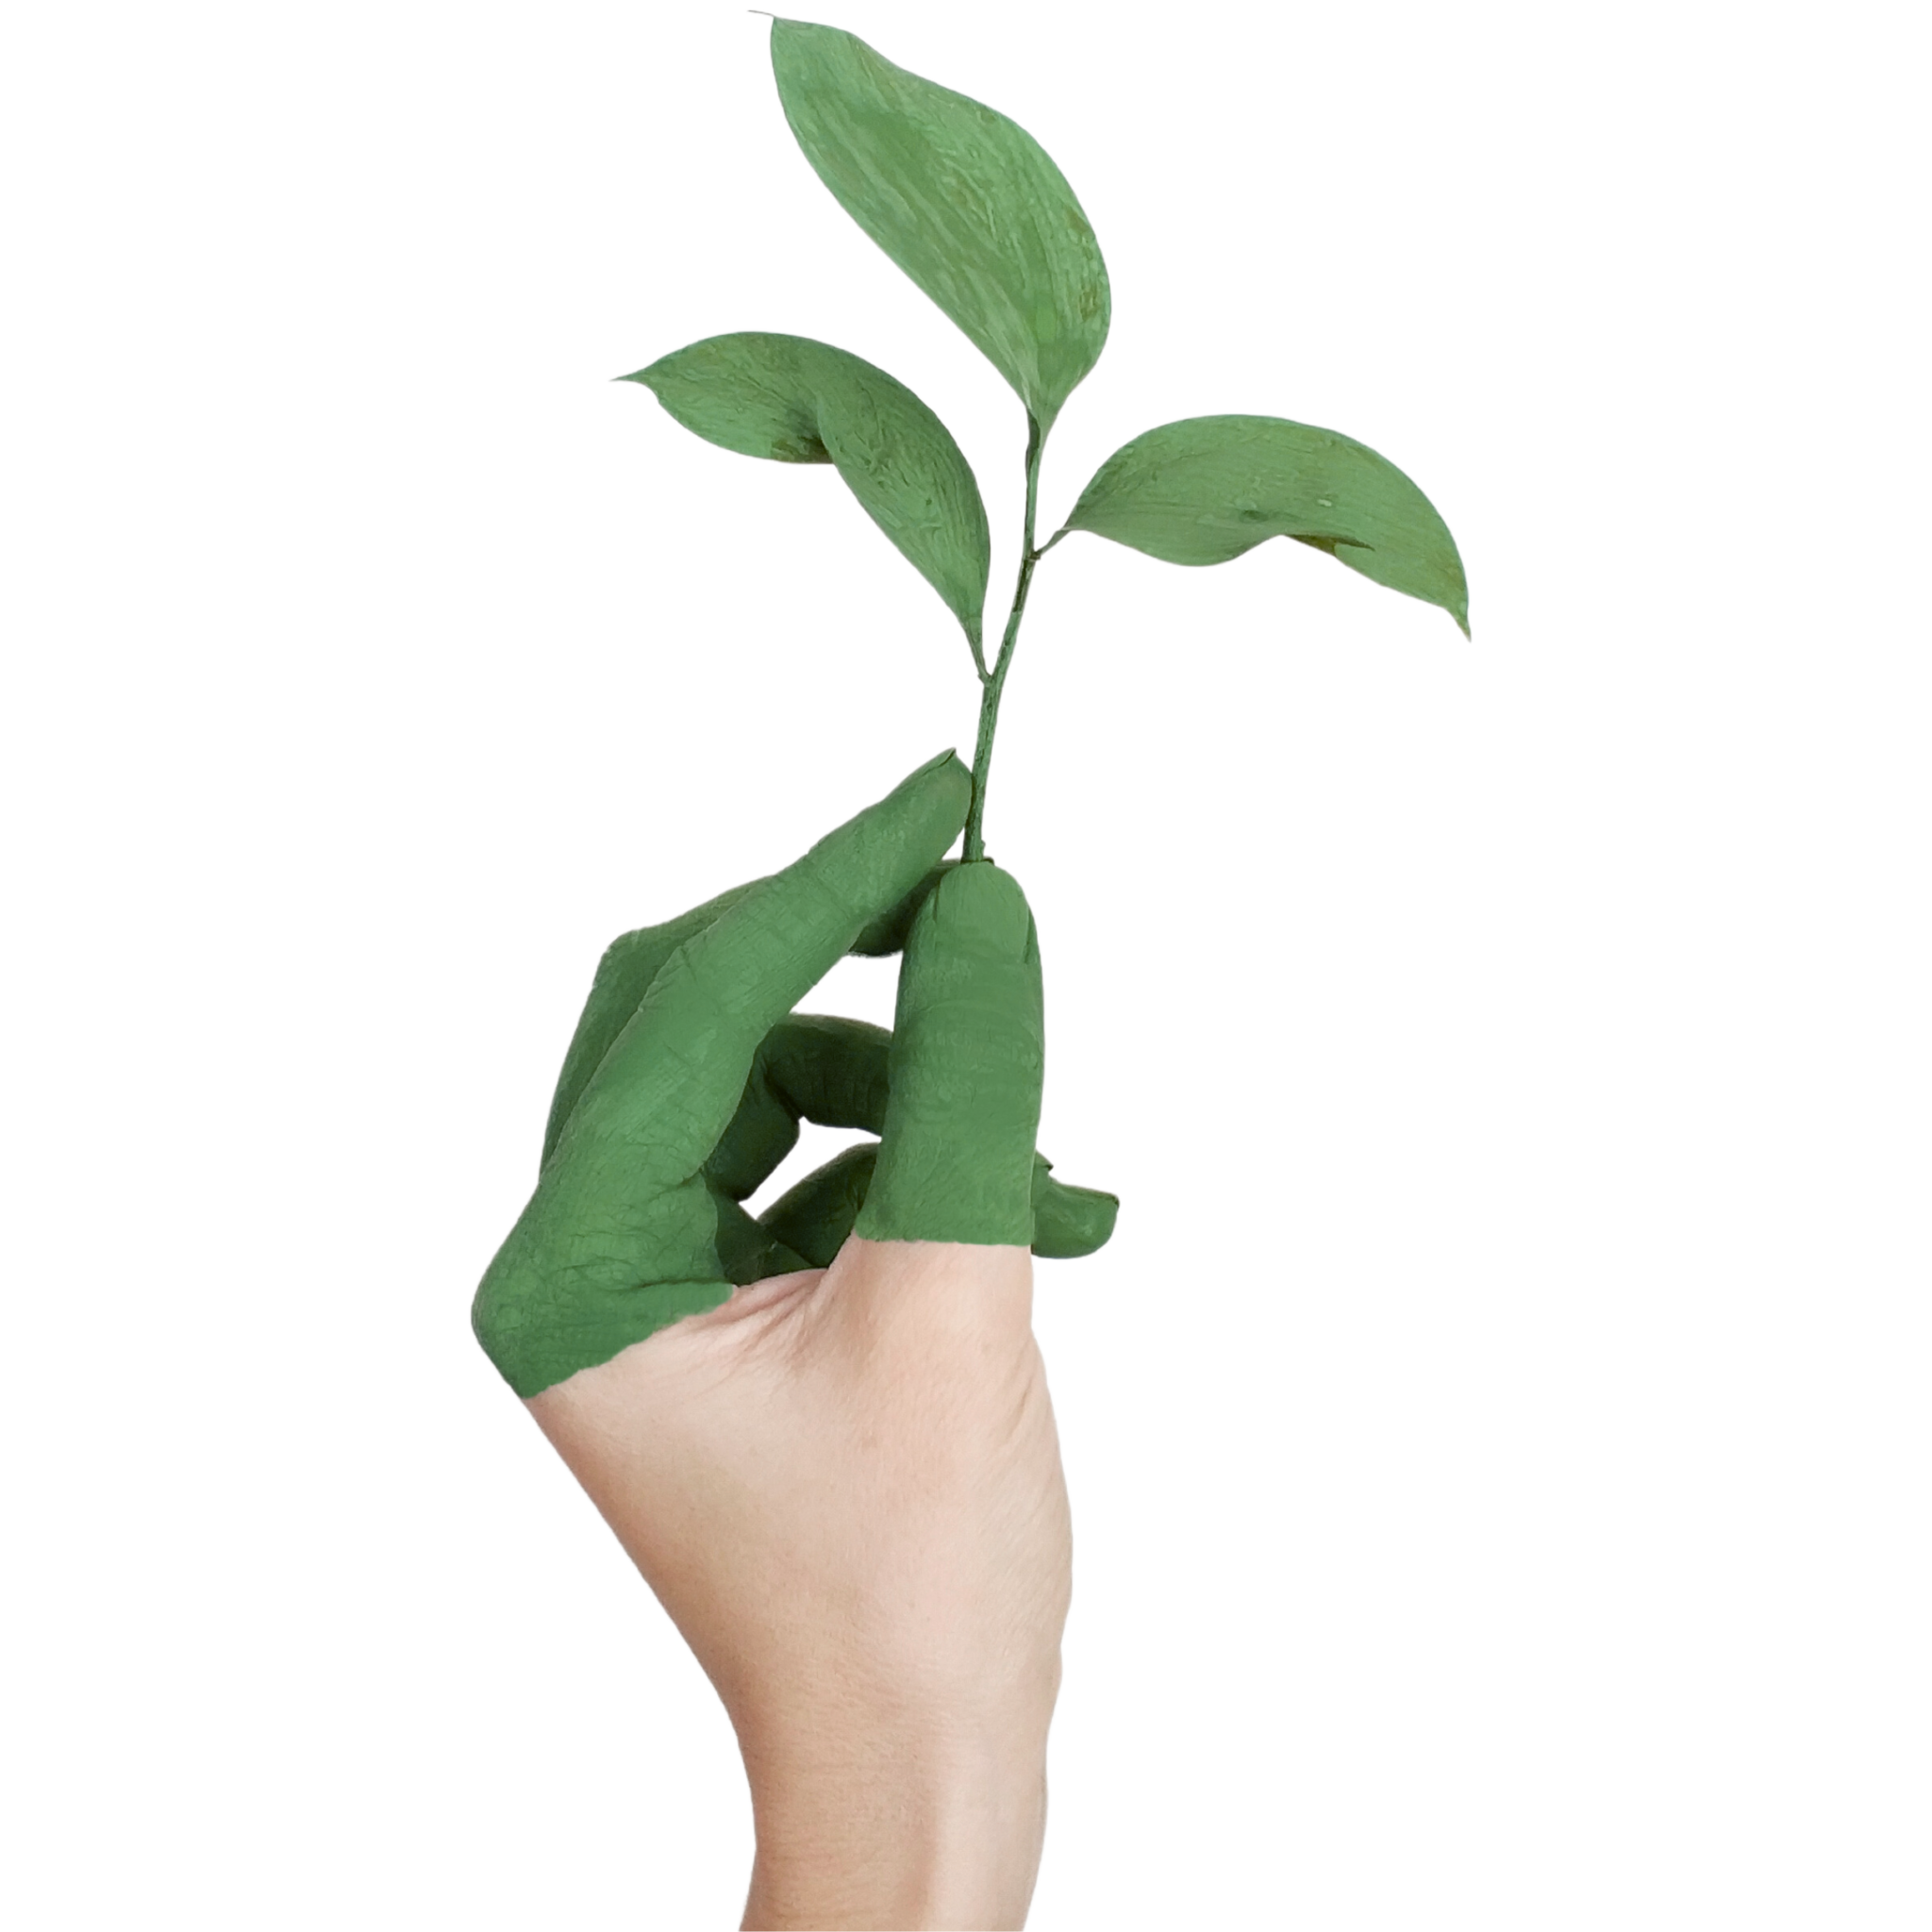 A finger holding a seedling, showing personal responsibility to sustainability - Packing Green has diverted 491kg of plastic waste